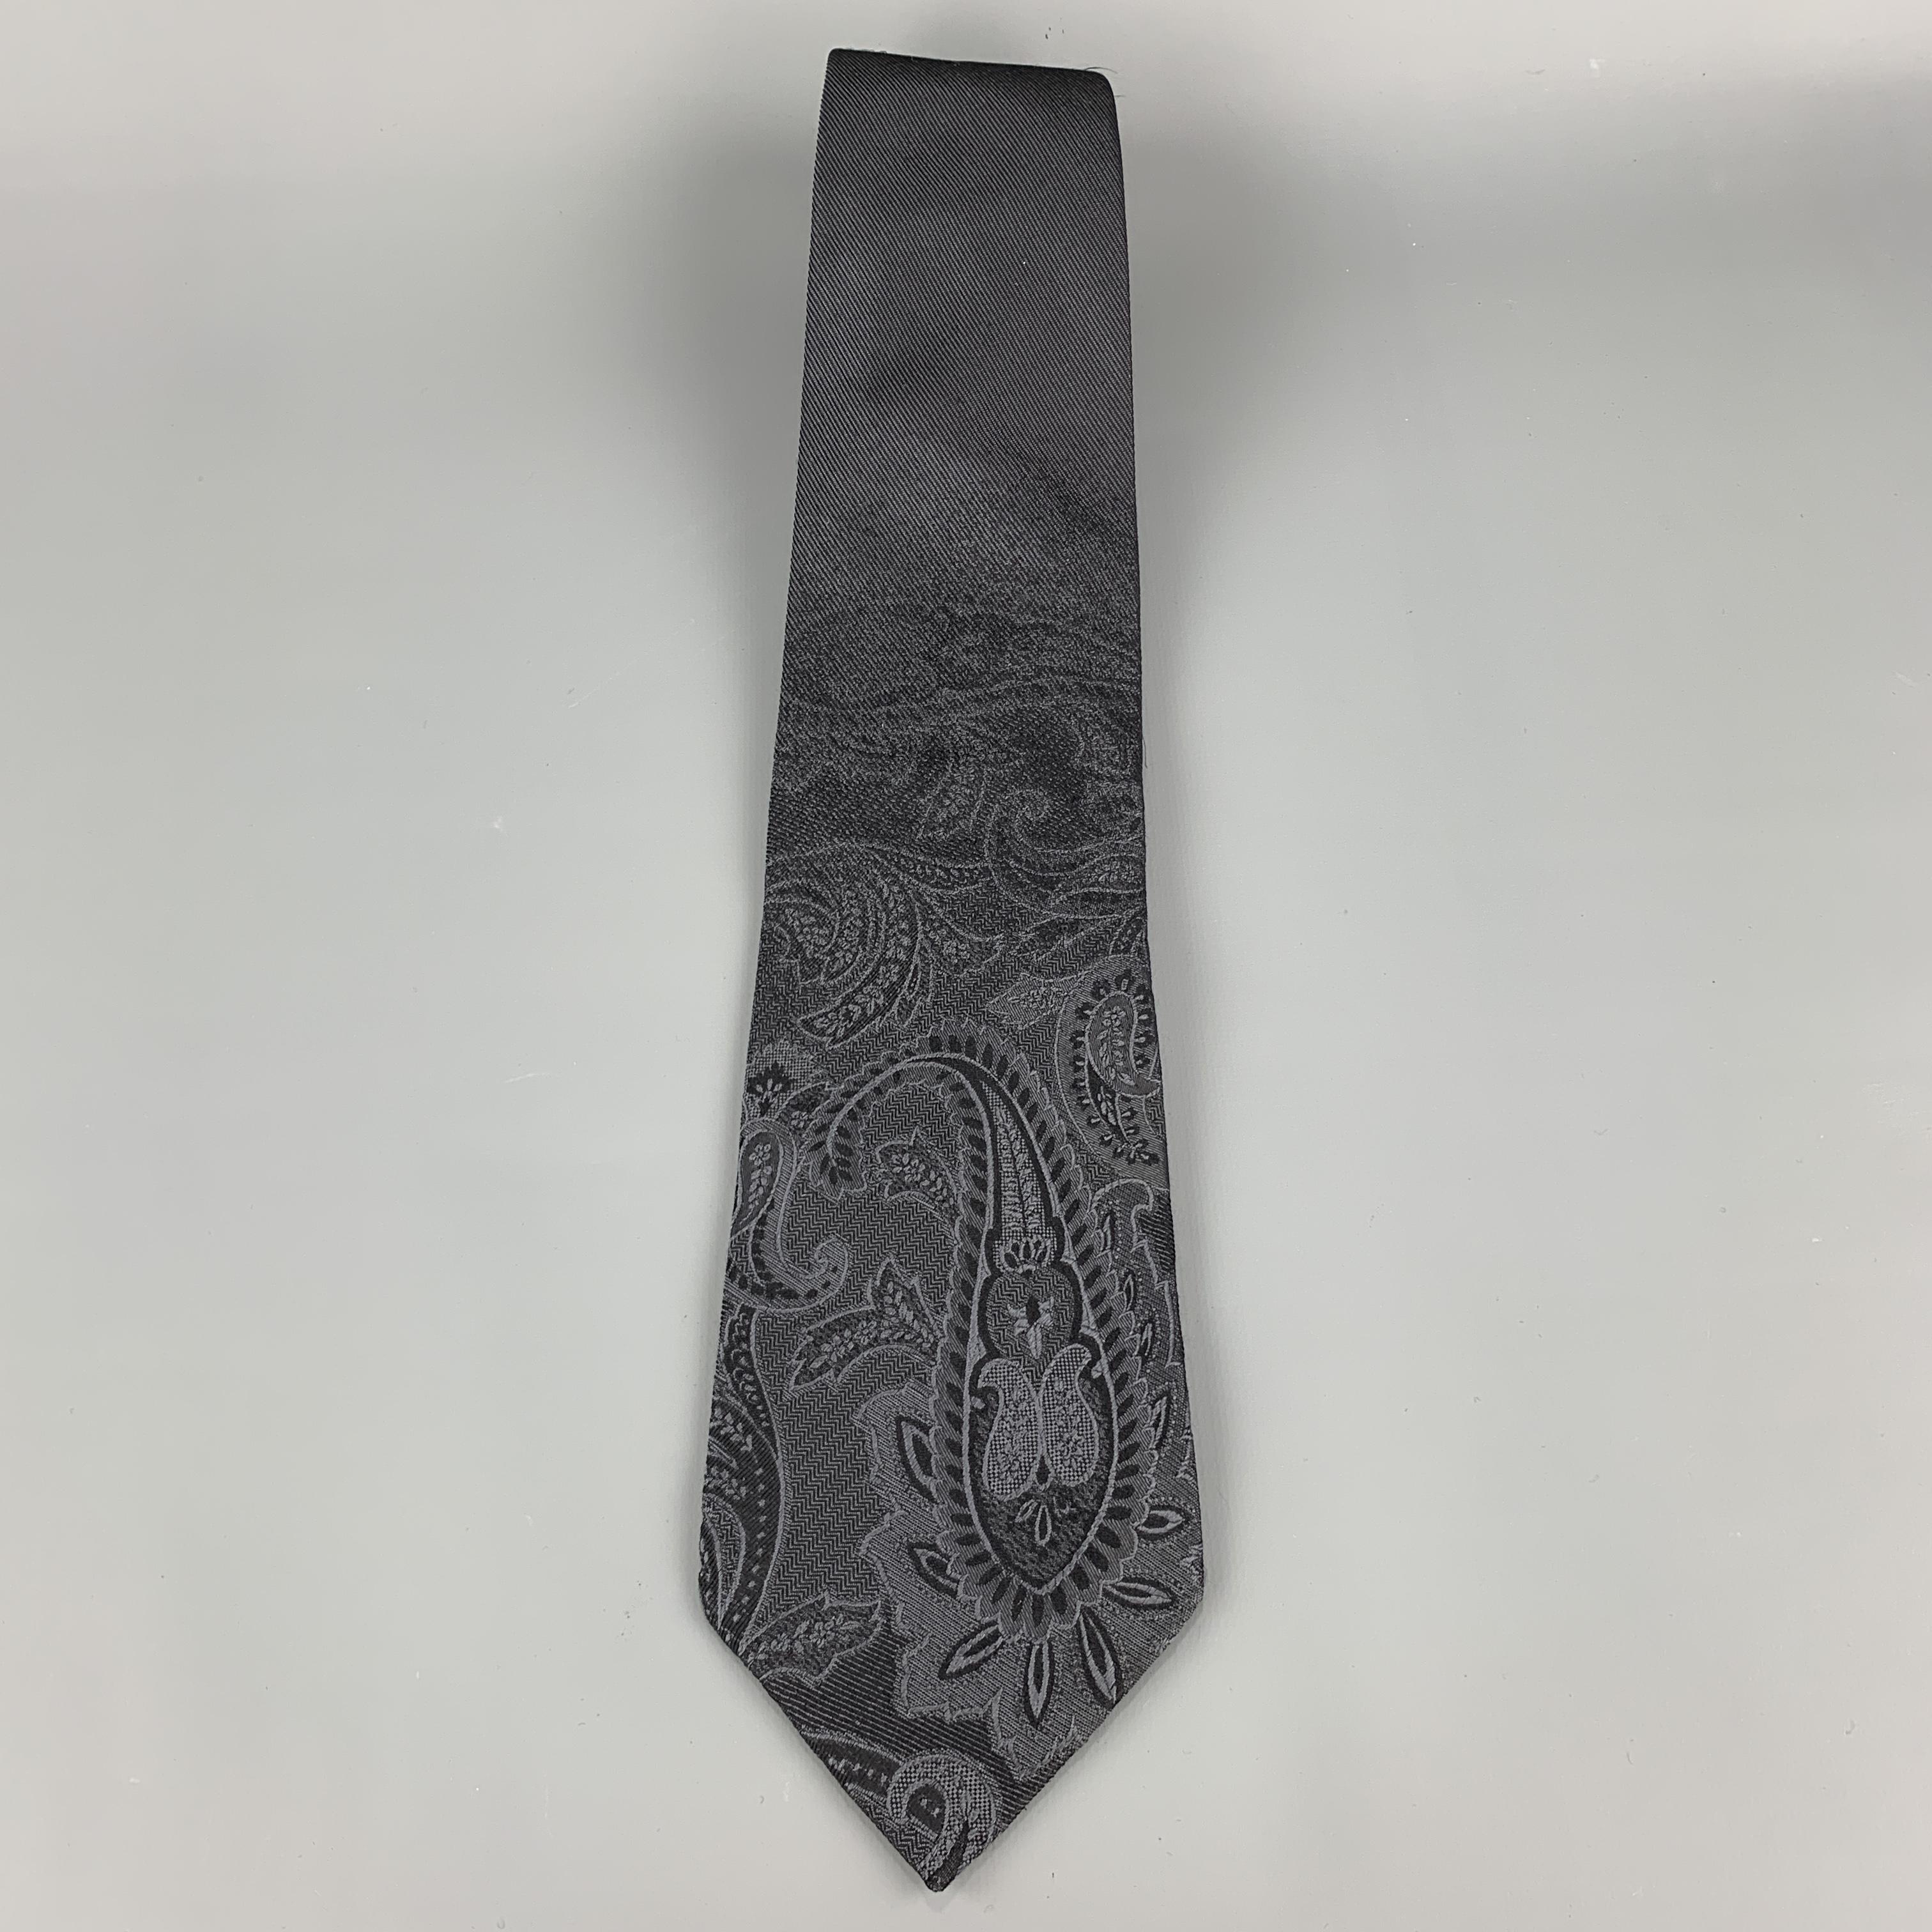 DOLCE & GABBANA necktie comes in charcoal silk twill with all over ombre paisley print. Made in Italy.

Very Good Pre-Owned Condition.

Width: 3.75 in.